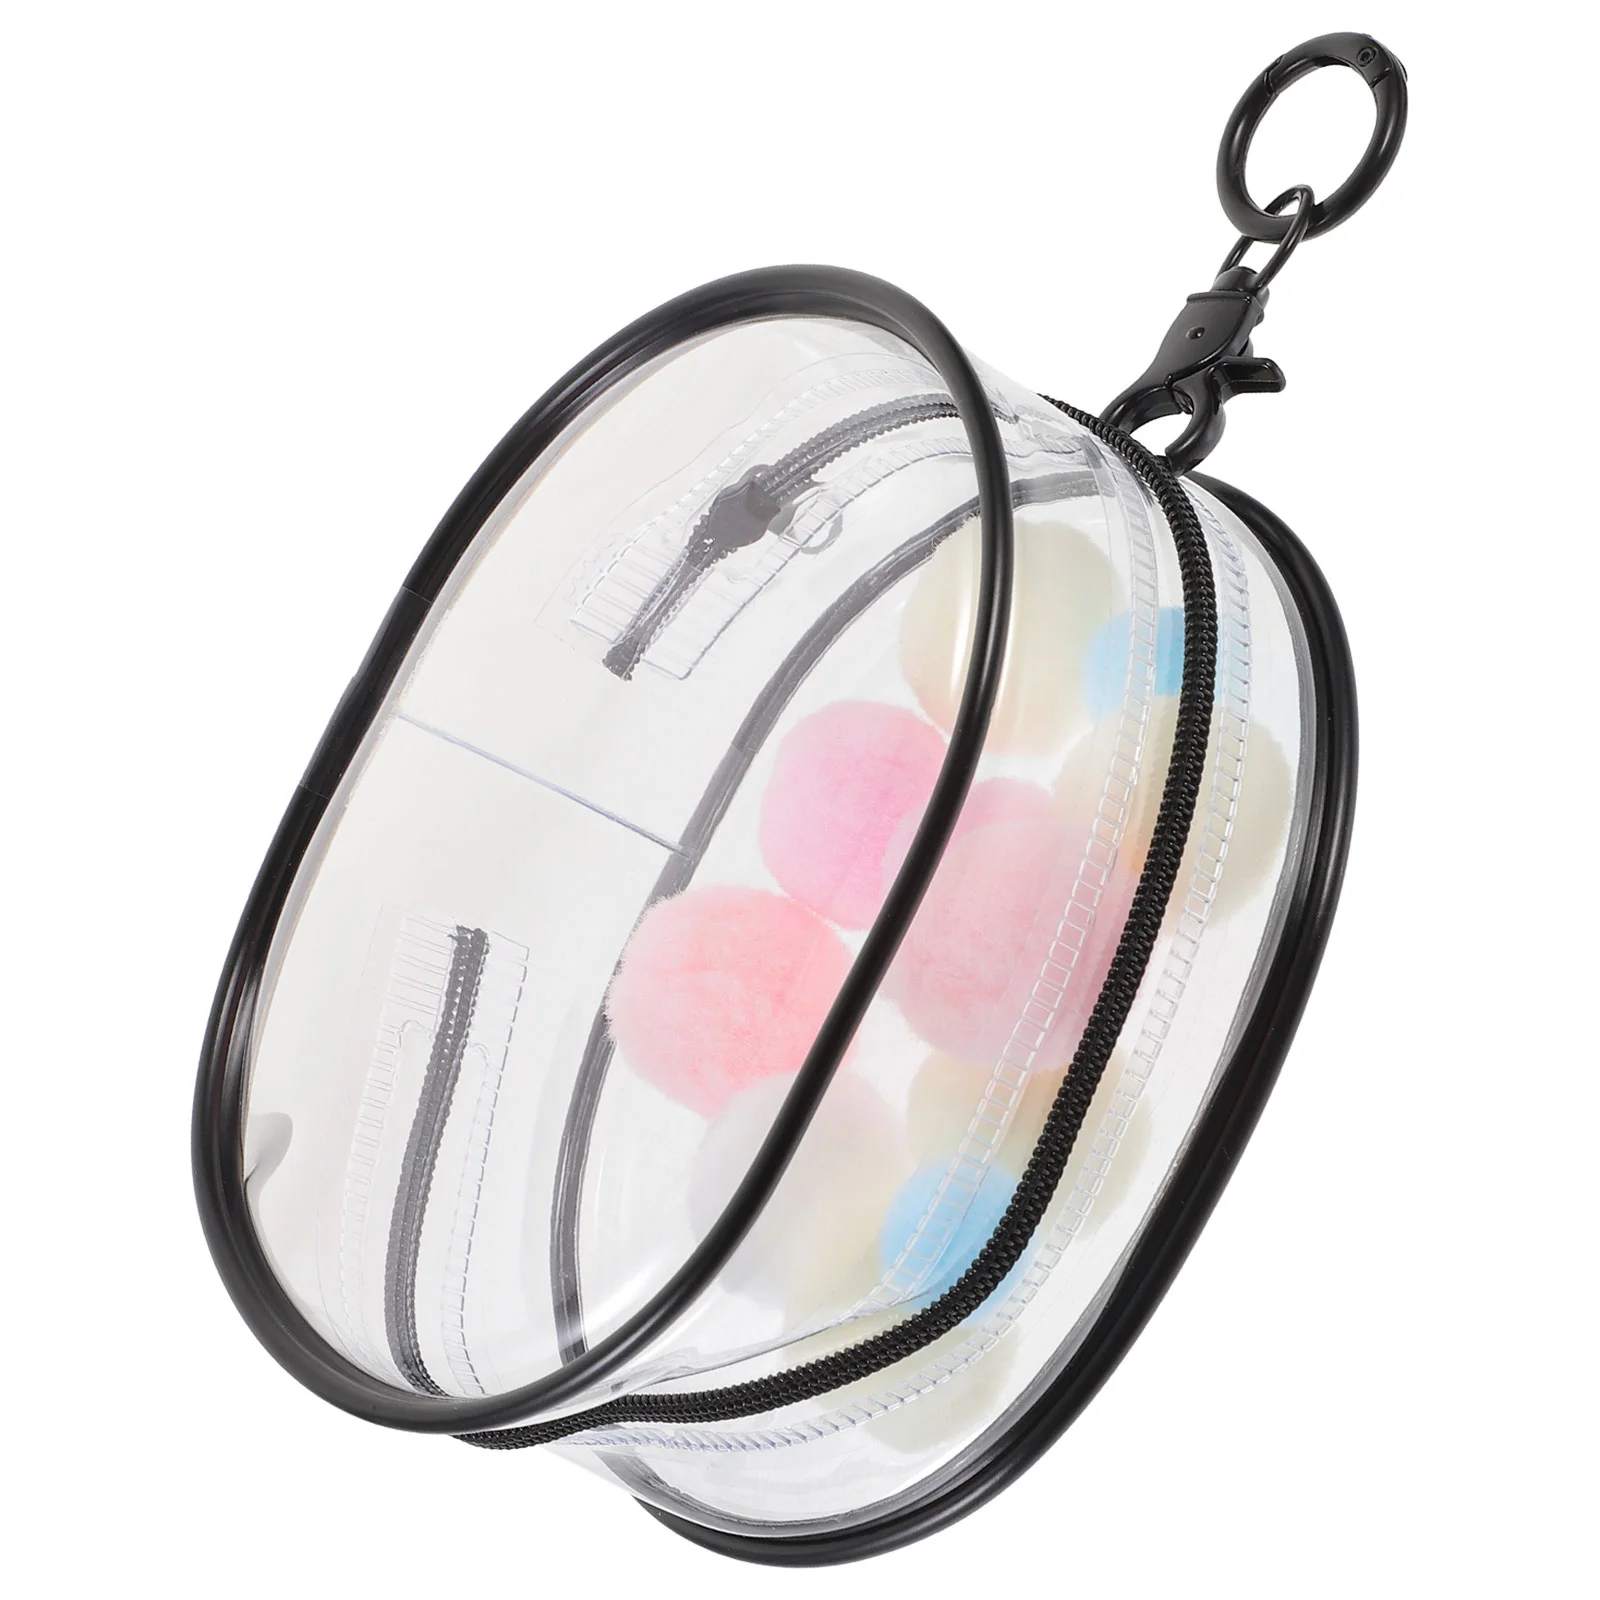 clear display case keychain small dolls pouch figures portable storage hanging bag zipper closure keychain charms Clear Display Case Keychain Mini Bag Figures Portable Storage Hanging Bag Zipper Closure Keychain Charms